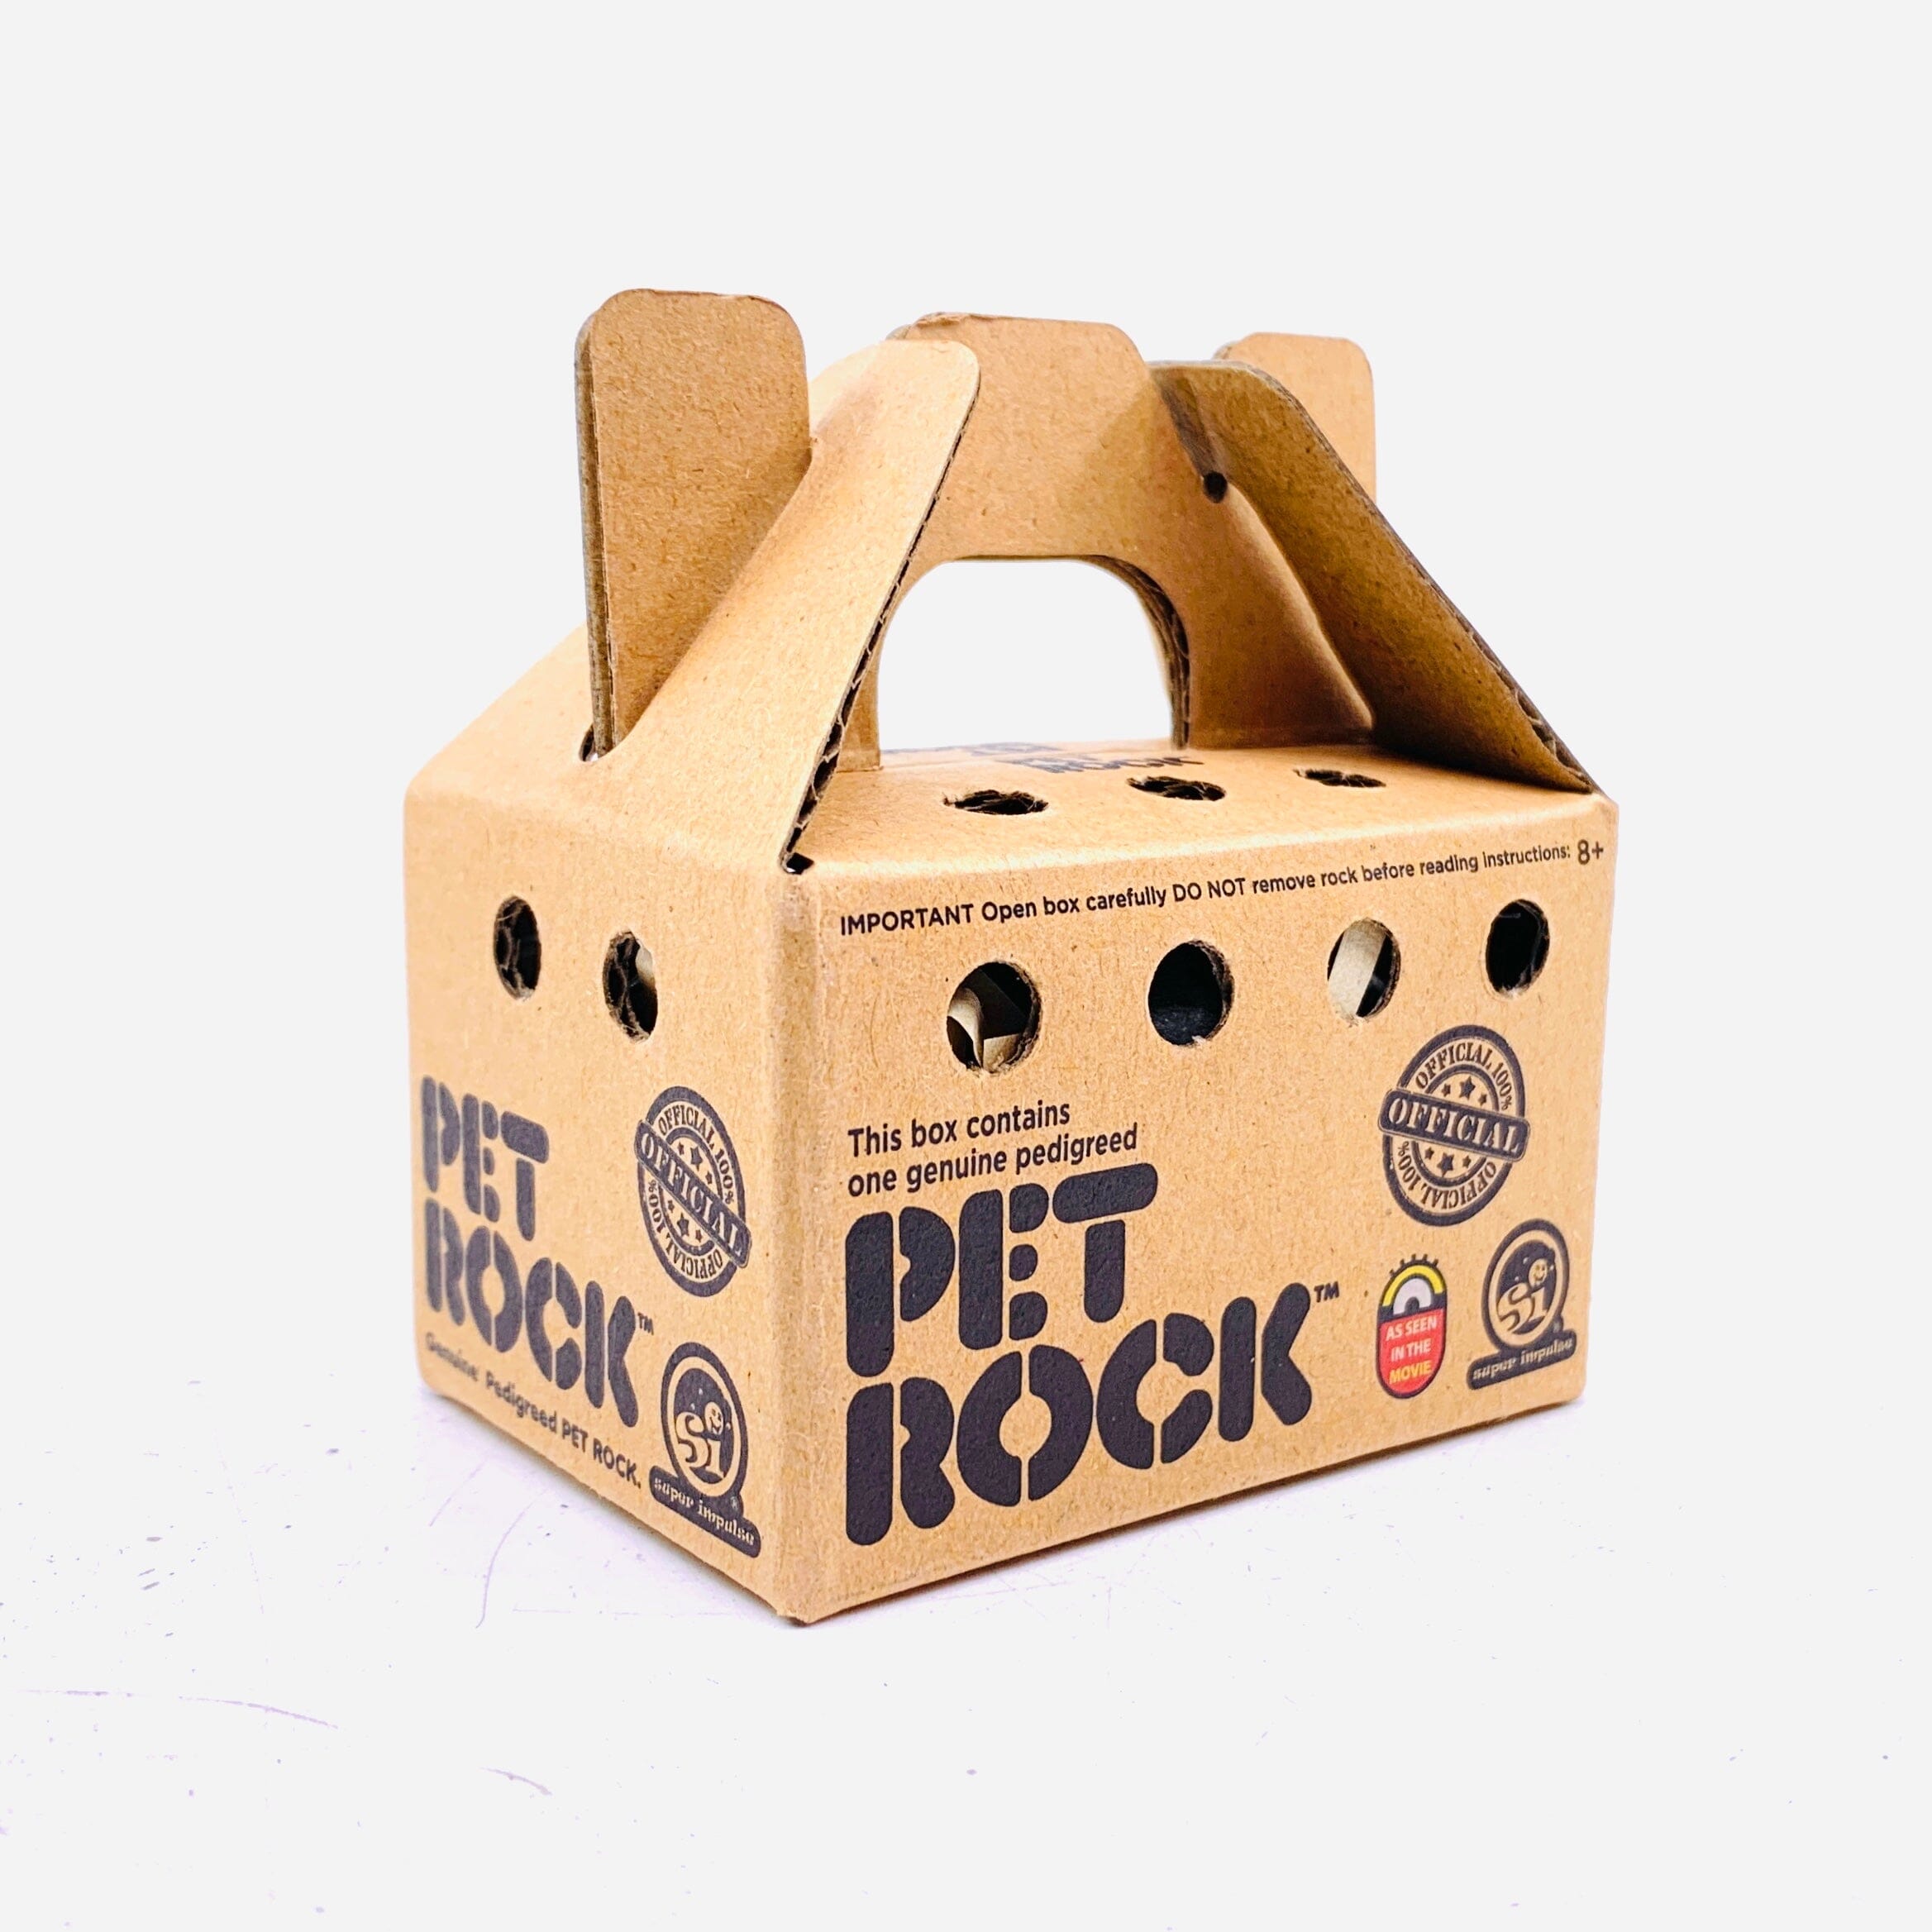 World's Smallest Pet Rock: The classic low maintenance pet in smaller form!